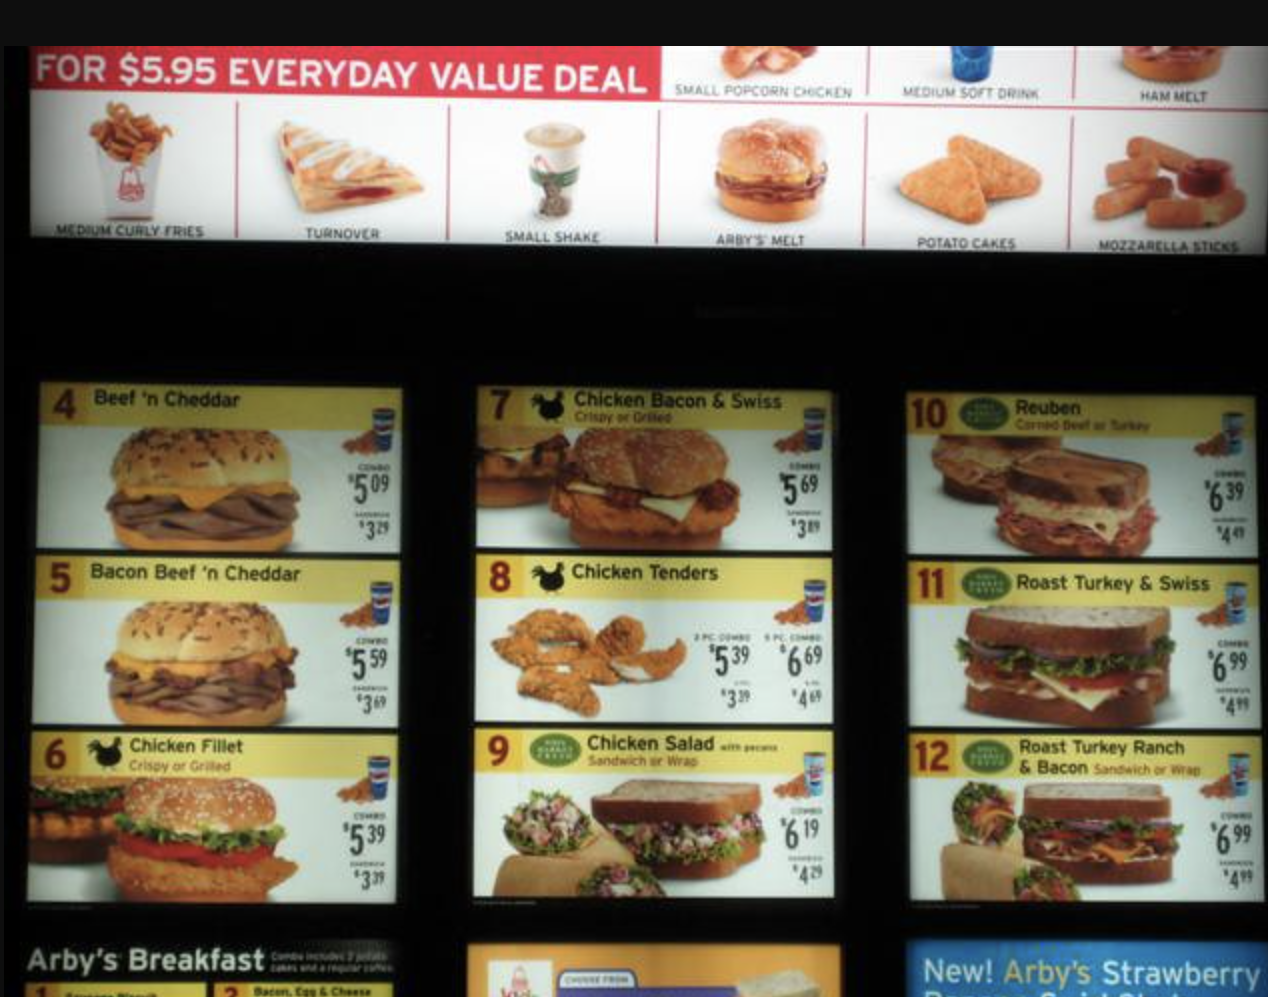 pasty - For $5.95 Everyday Value Deal Small Popcorn Chicken Medium Soft Drink Ham Melt Ly Fries Turnover Small Shake Potato Cakes Mozzarella Sticks 4 Beef 'n Cheddar Chicken Bacon & Swiss 10 Reuben Core Det Sukey 509 569 639 3 5 Bacon Beef 'n Cheddar 8 Ch